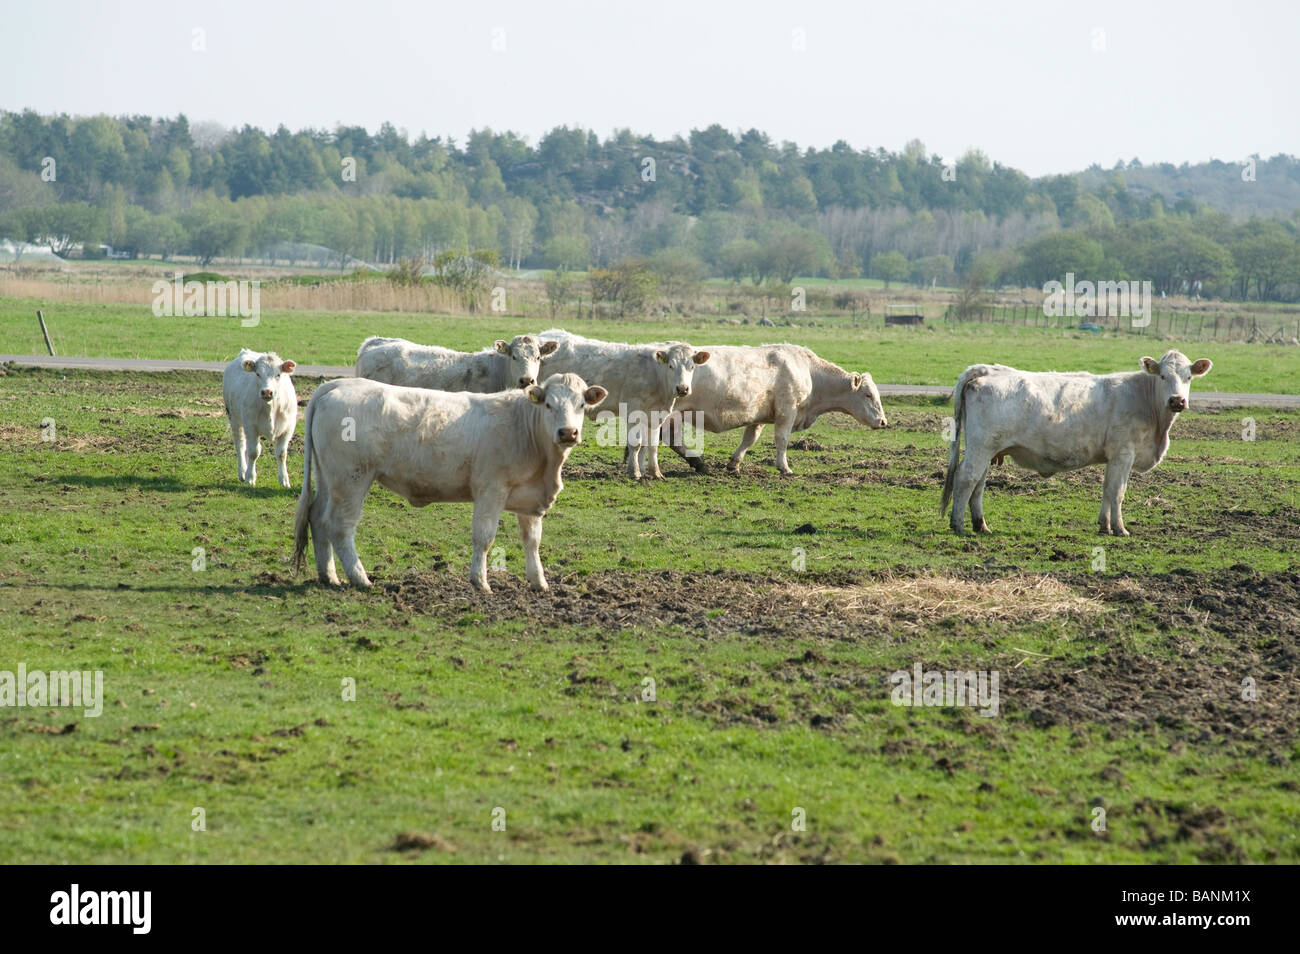 Herd of white cows, Sweden Stock Photo